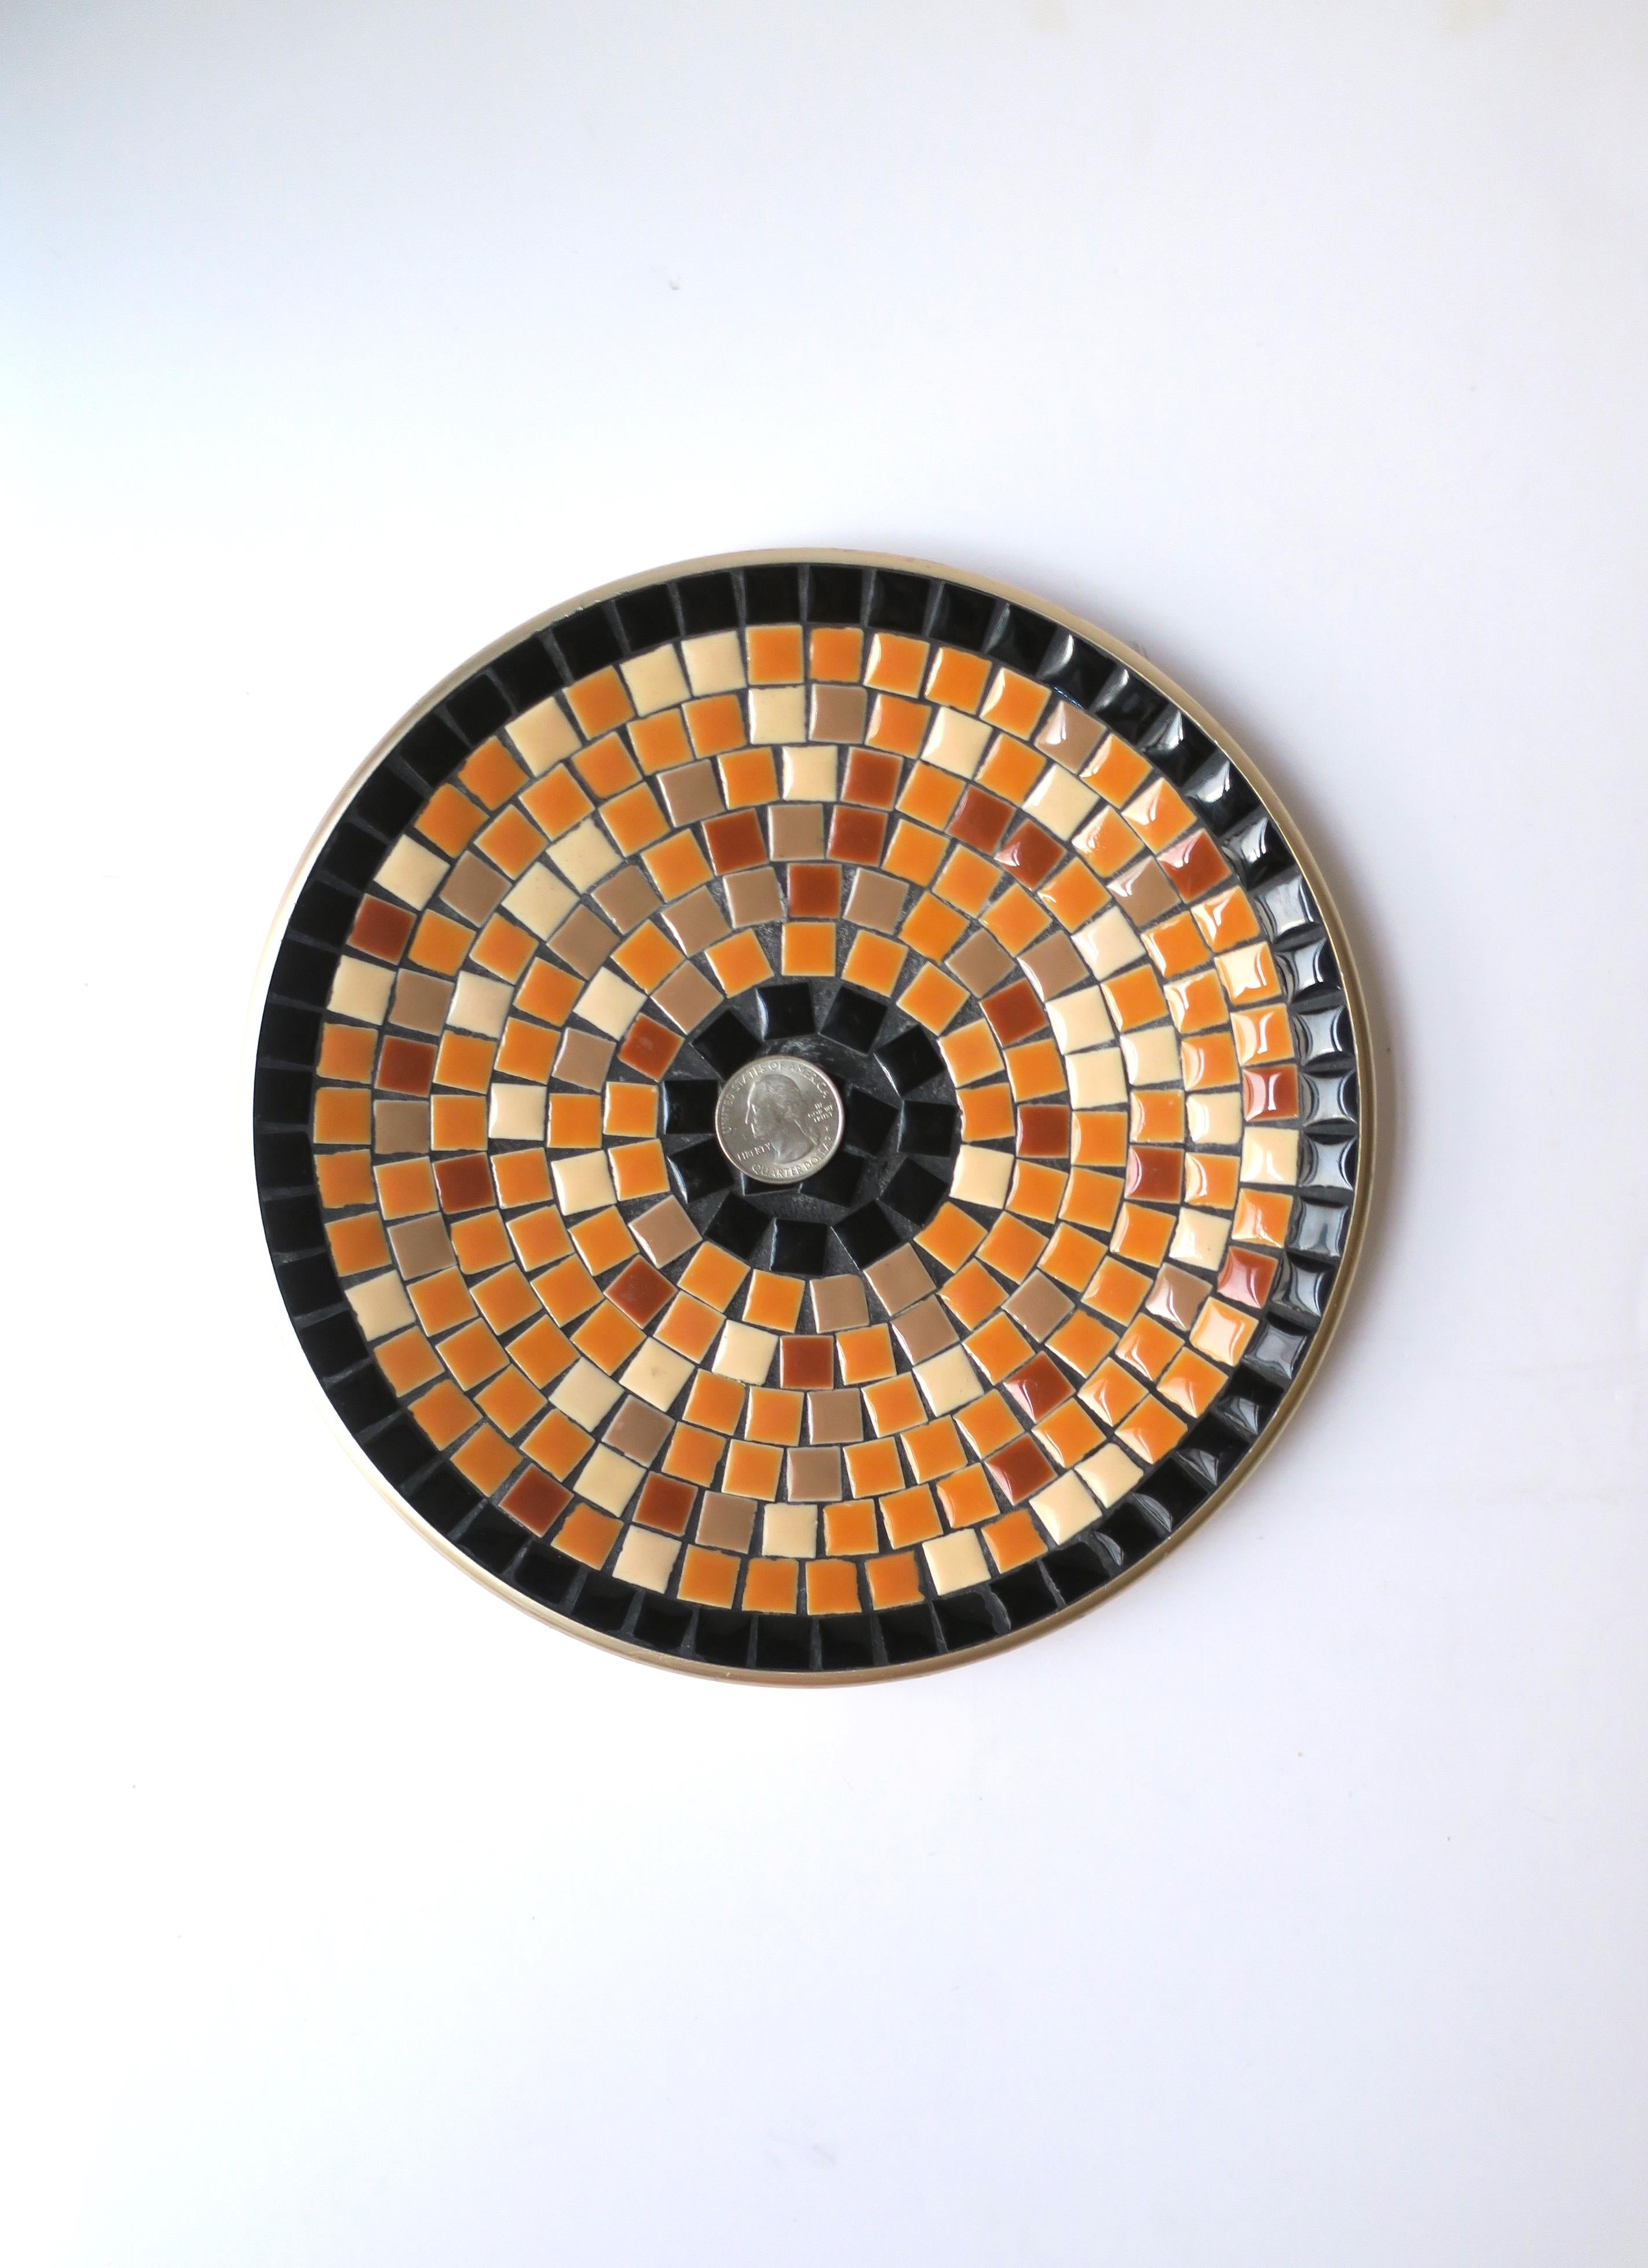 Mosaic Ceramic Tile Dish Vide-Poche Catchall Black and Terracotta, circa 1960s In Good Condition For Sale In New York, NY